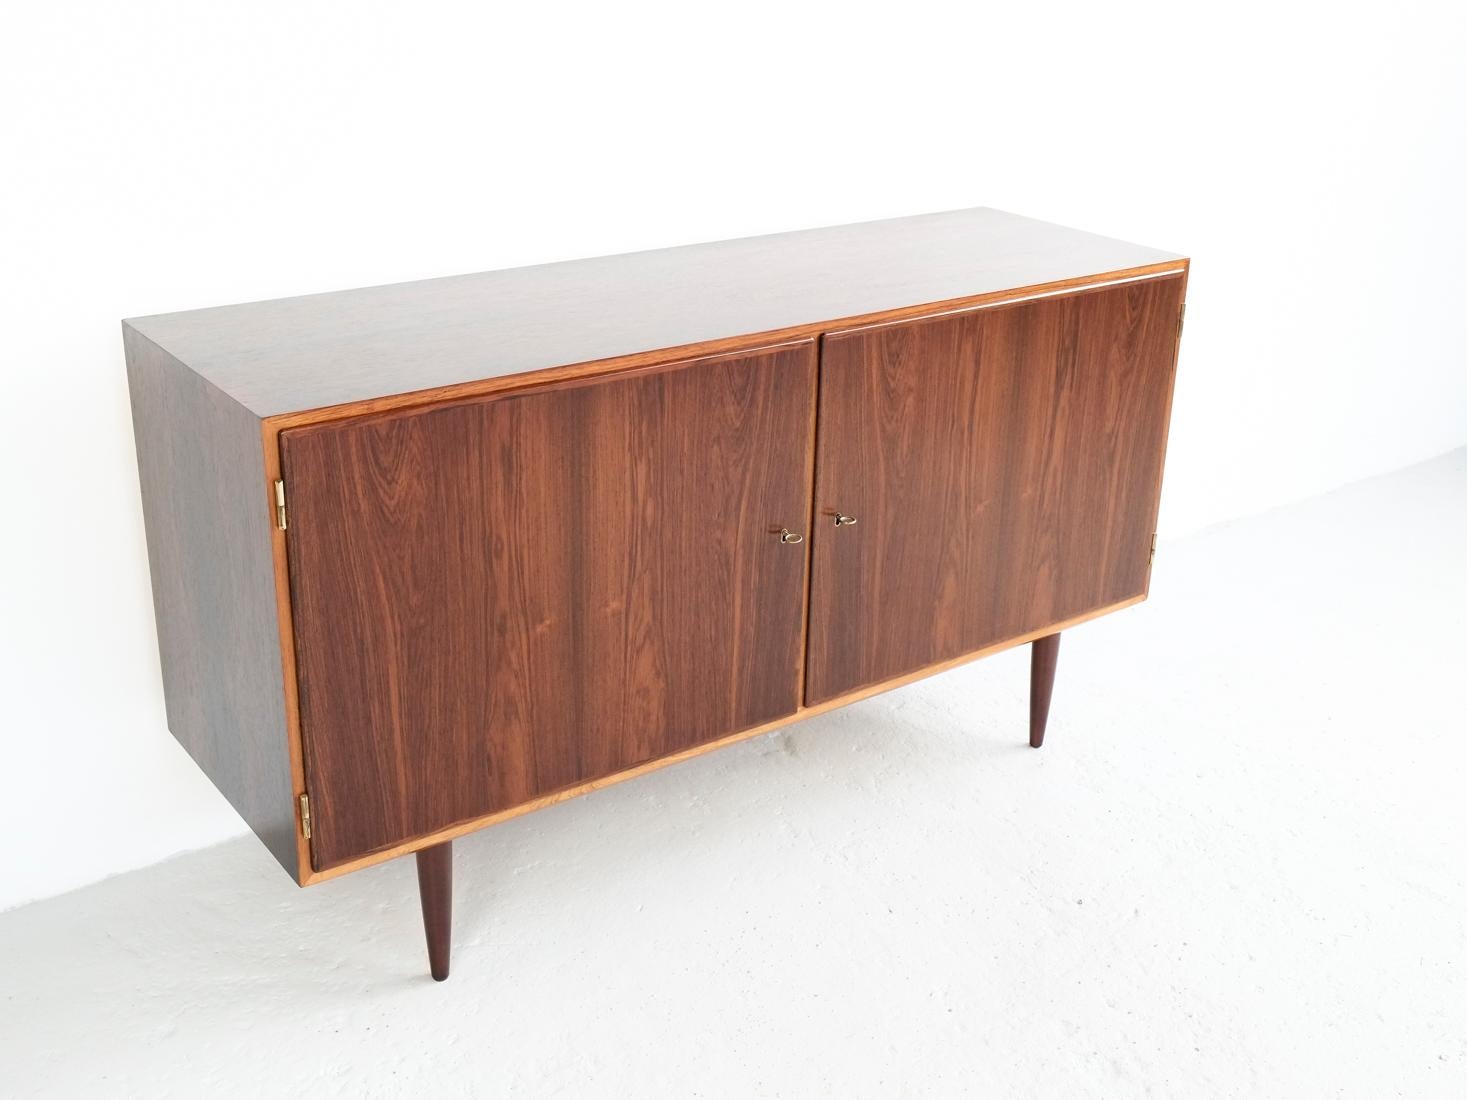 Midcentury Danish Sideboard with 2 Doors in Rosewood by Hundevad 1960s For Sale 3